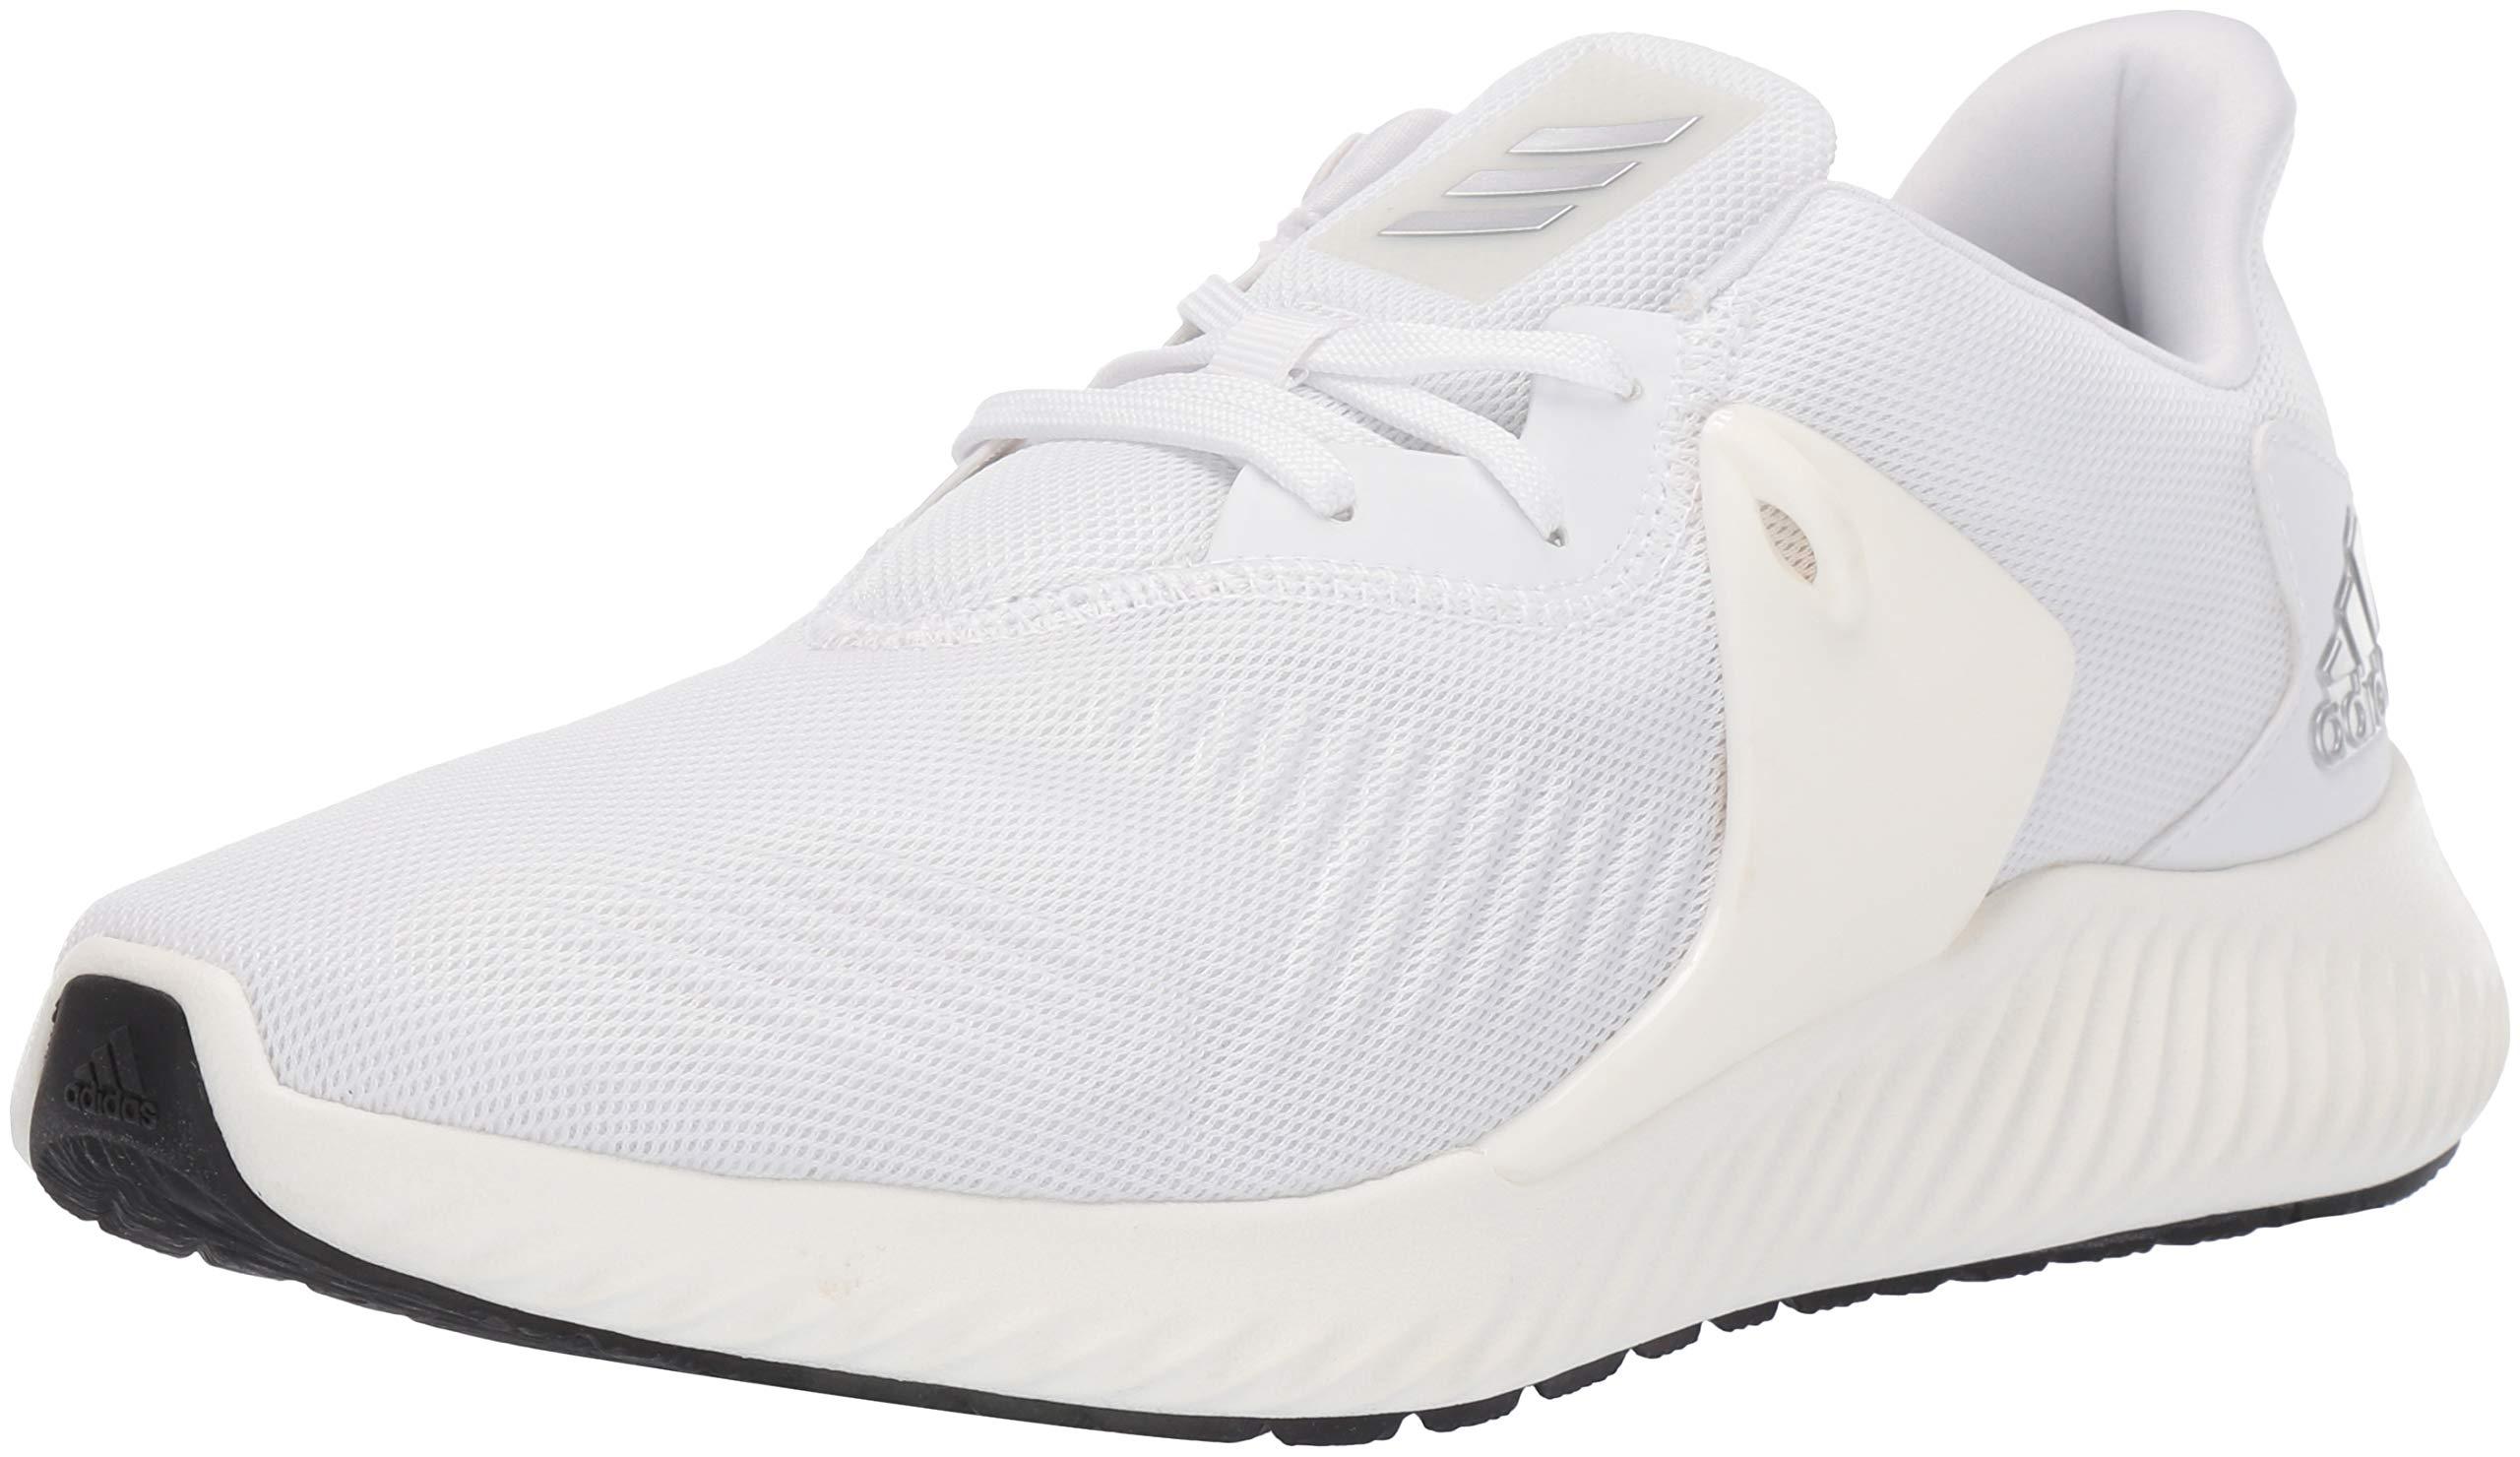 adidas Lace Alphabounce Rc 2 Running Shoe in White for Men - Lyst